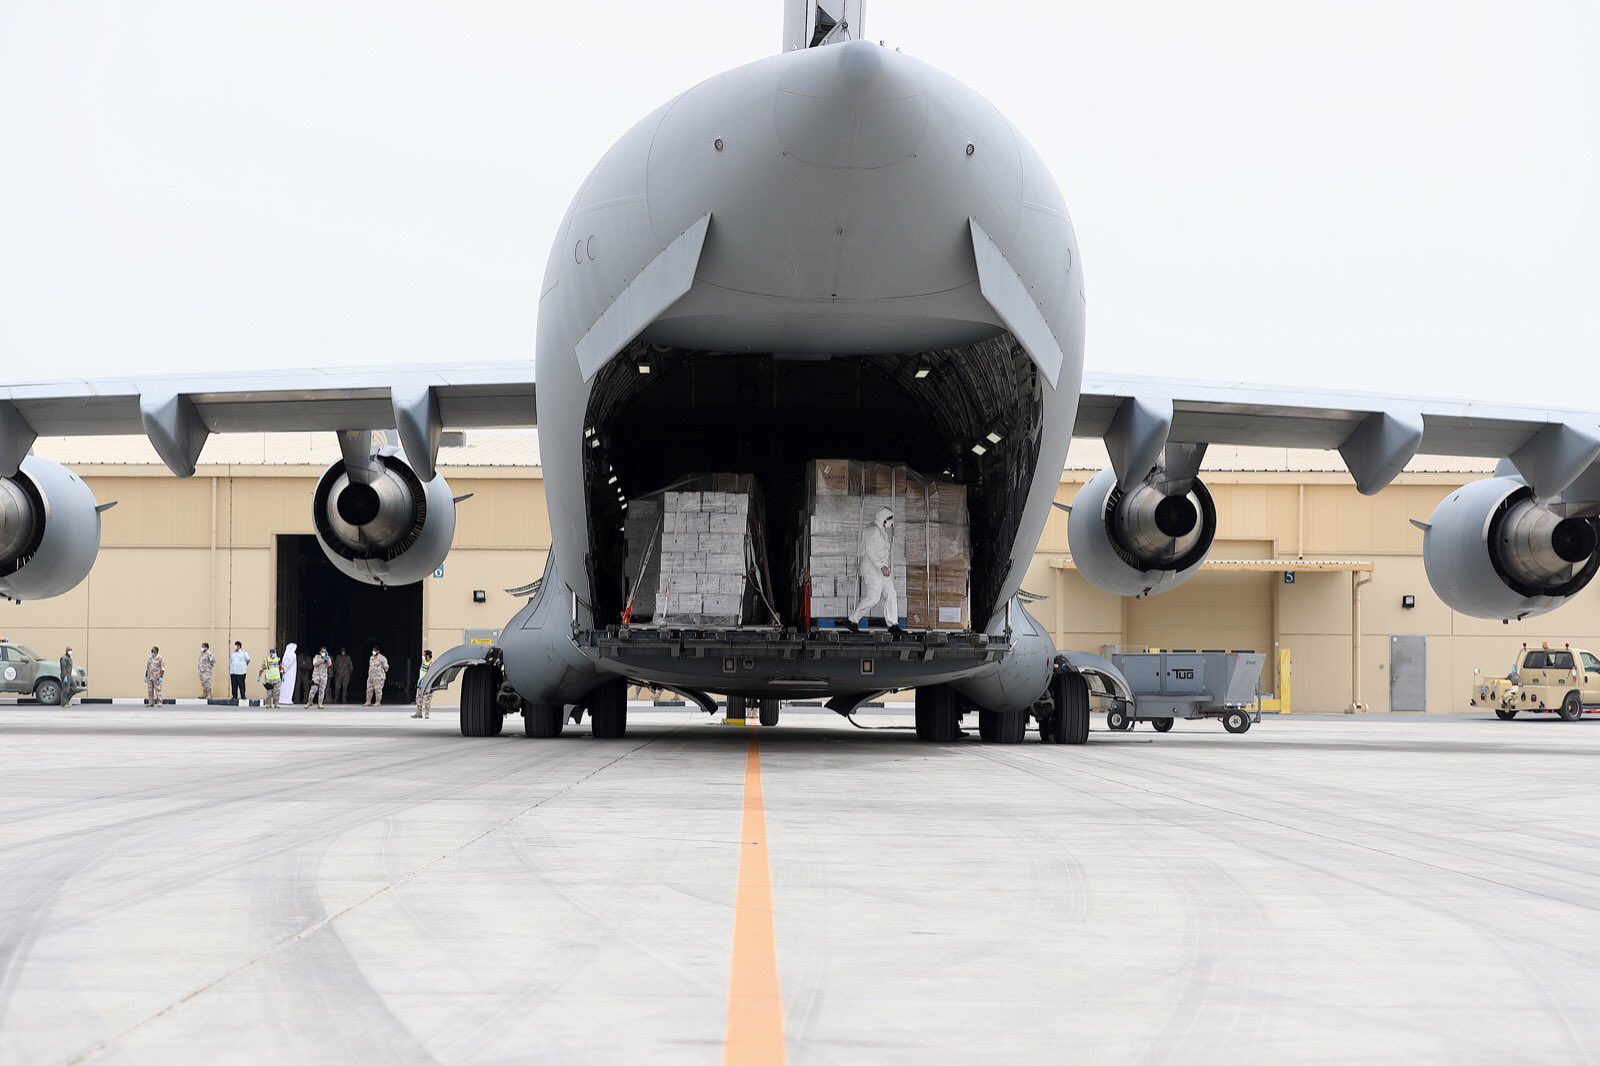 Amiri Air Force begins transporting medical equipment from China.